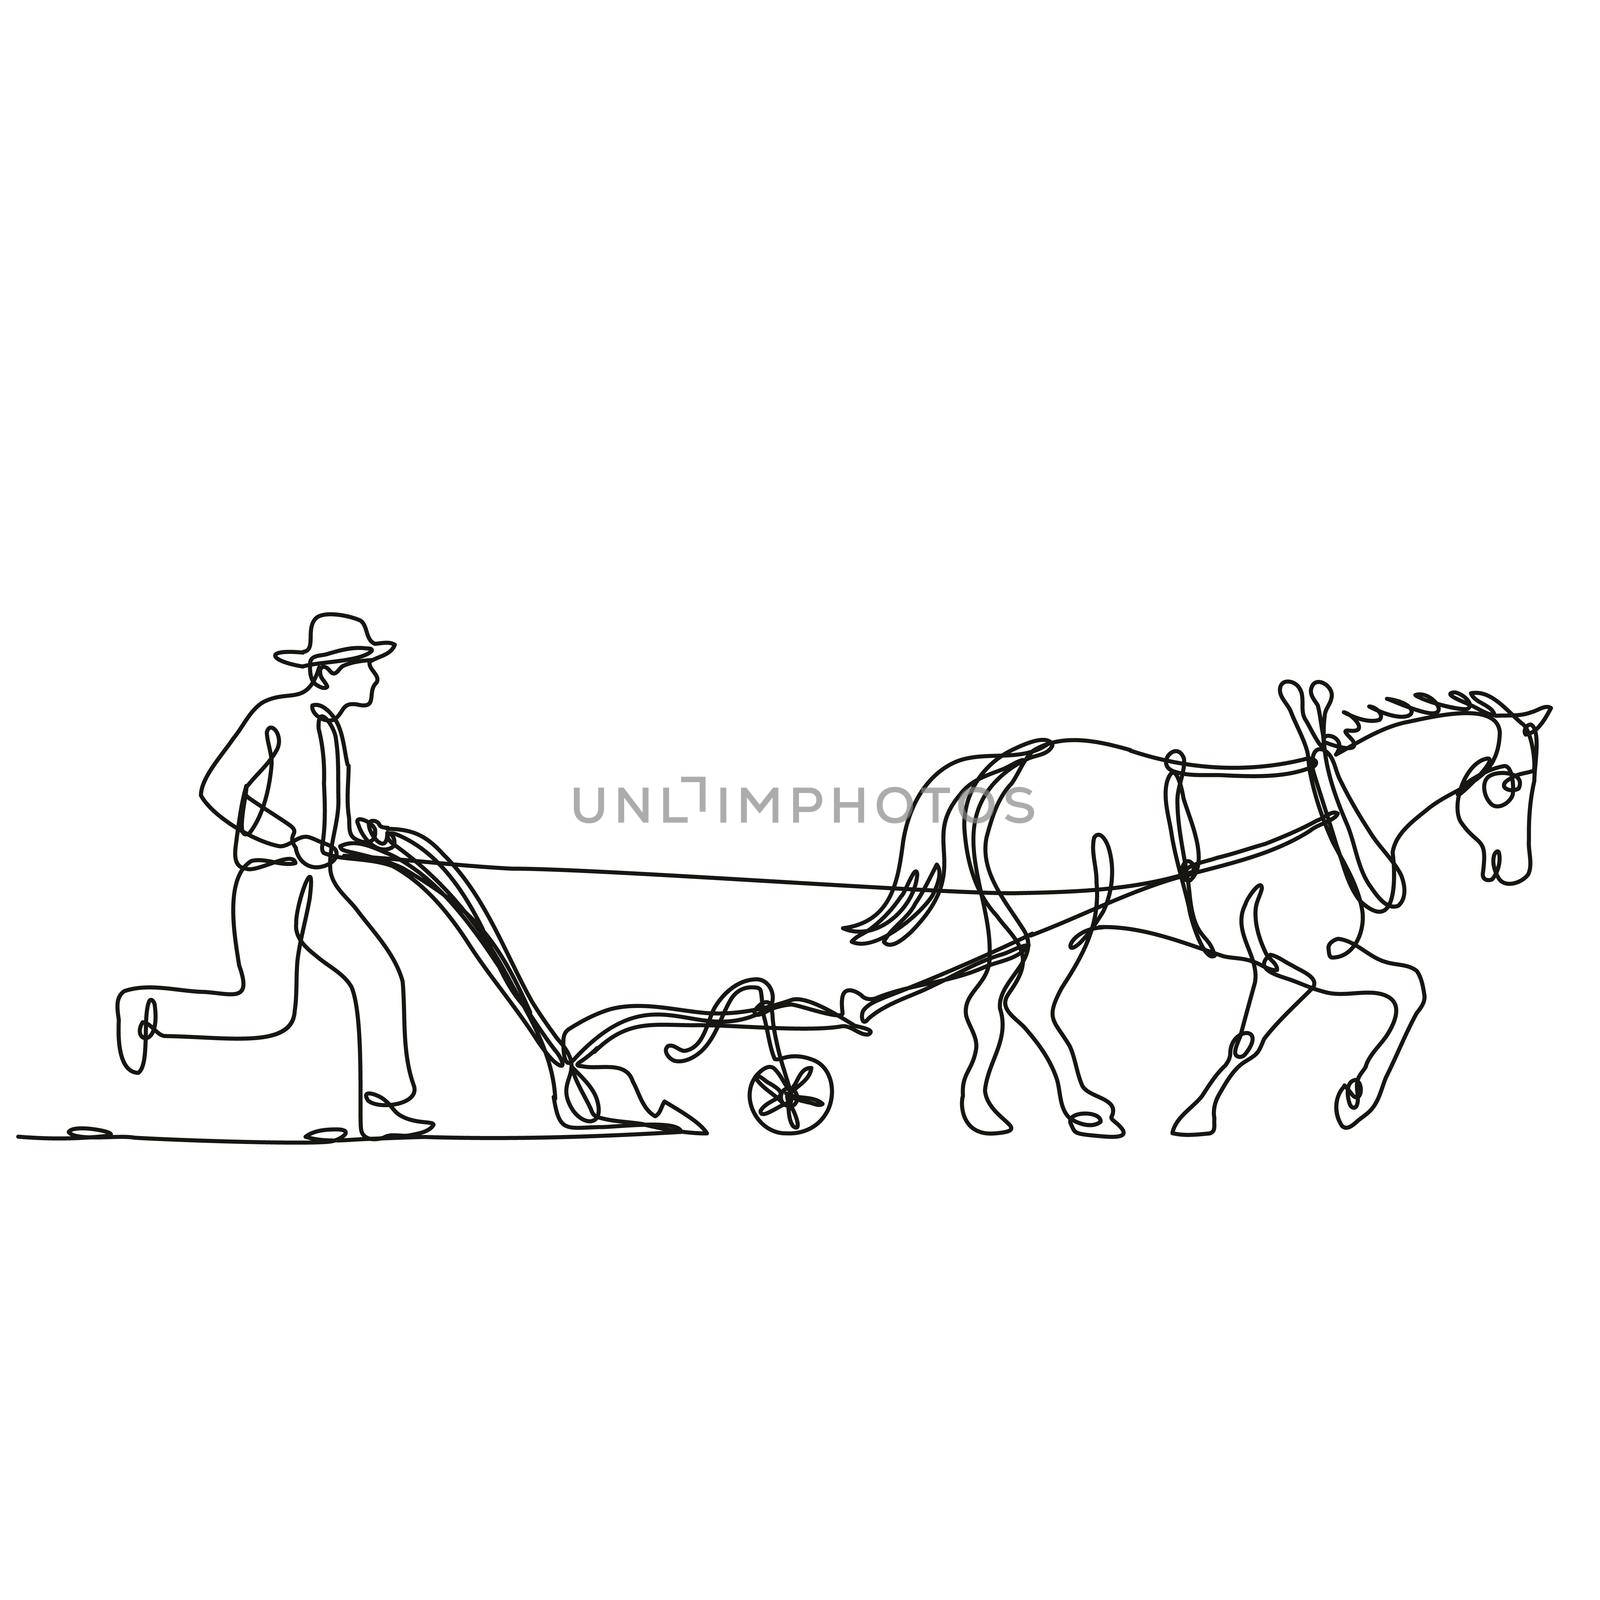 Continuous line drawing illustration of an organic farmer and horse plowing field side view done in mono line or doodle style in black and white on isolated background. 